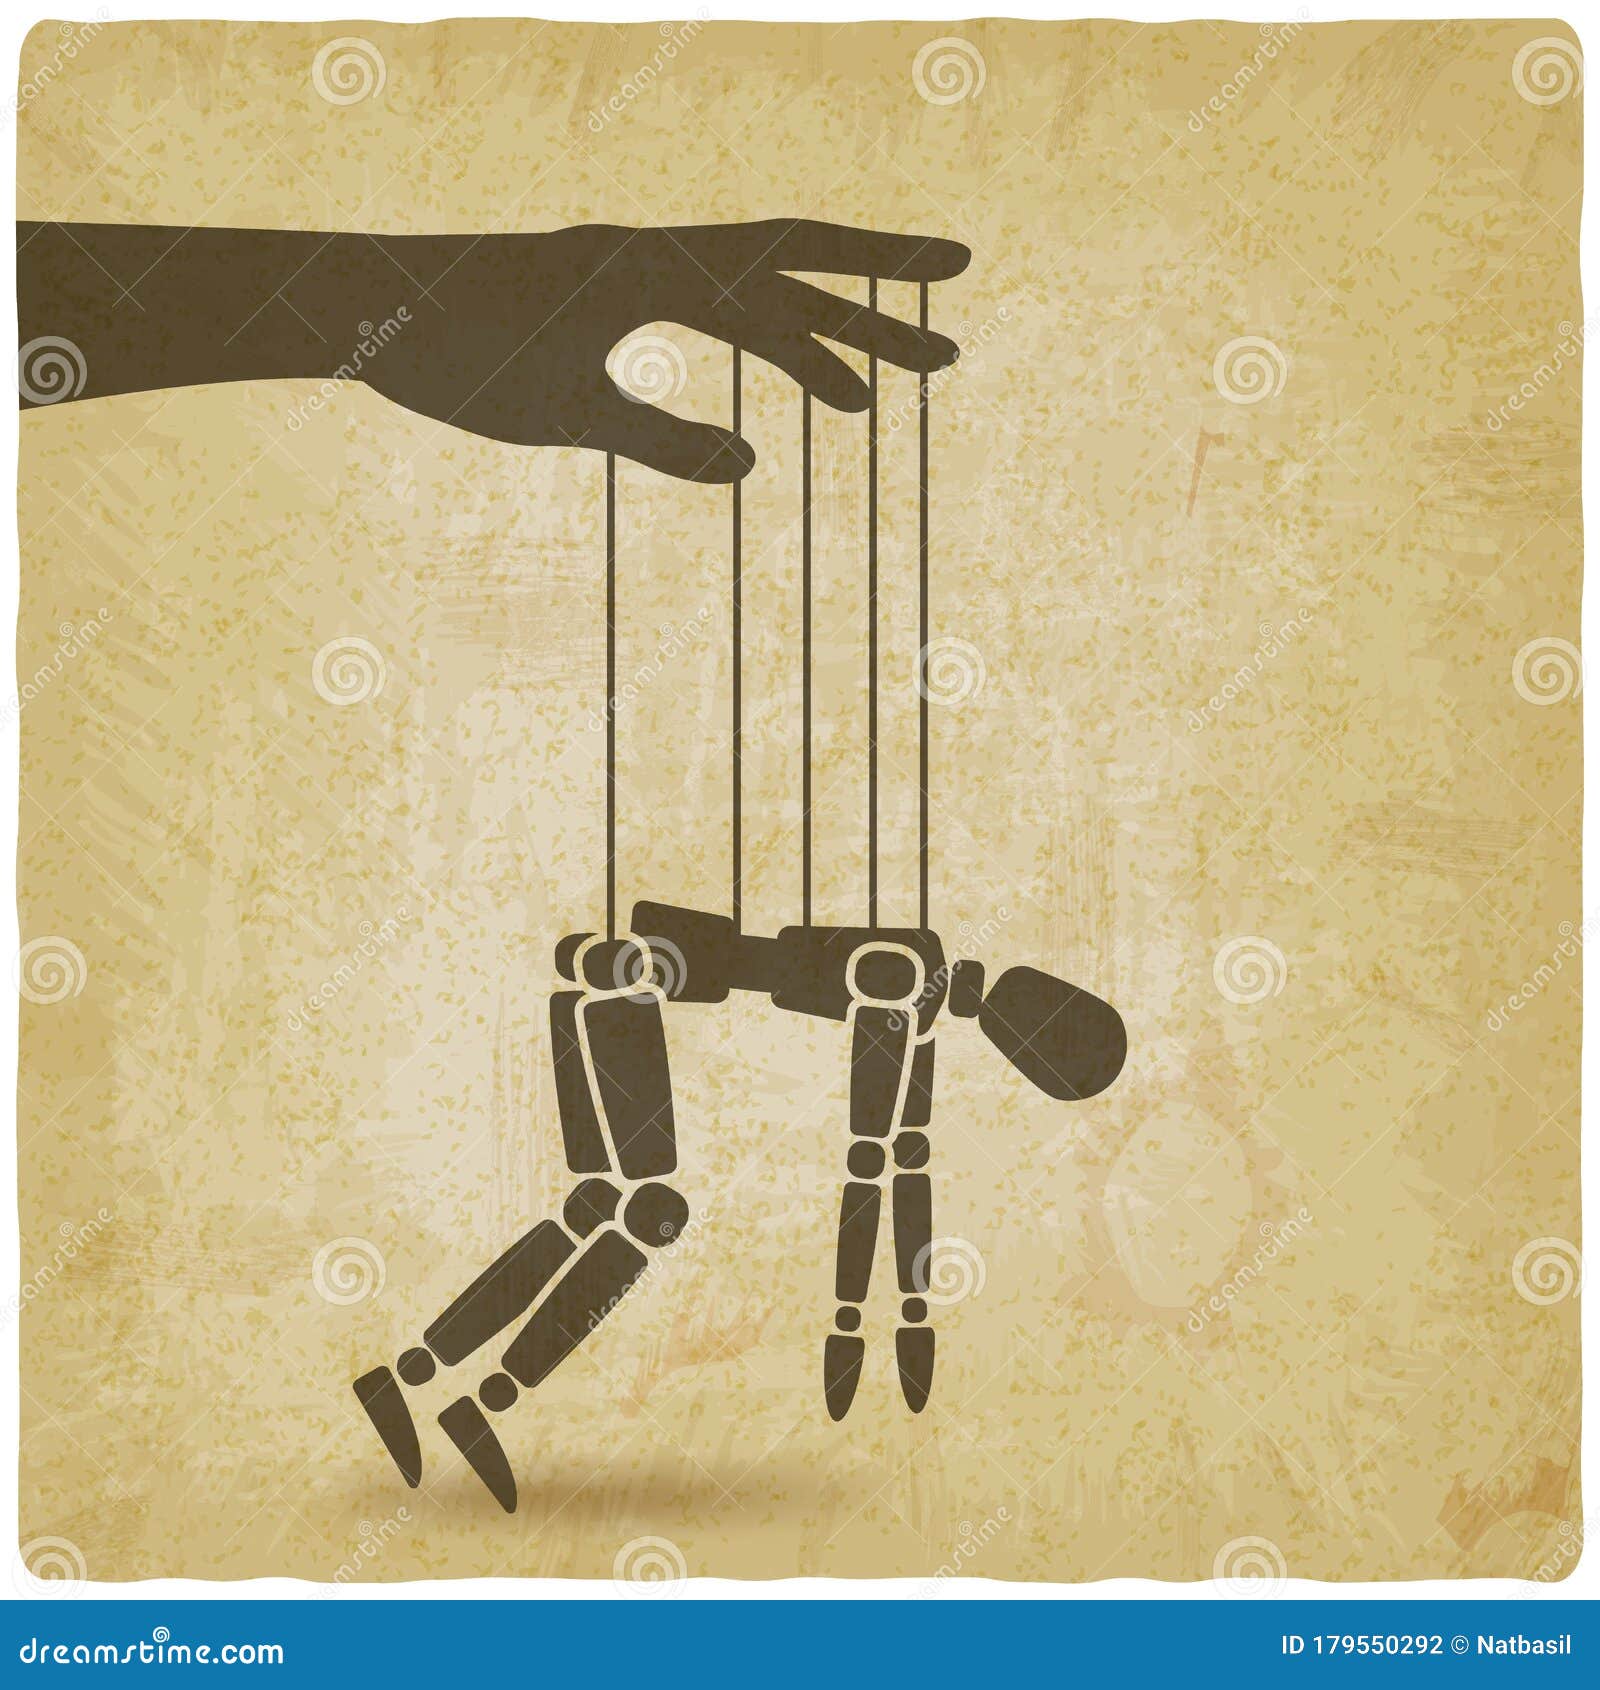 Puppet marionette on ropes on vintage background. Chronic fatigue syndrome concept